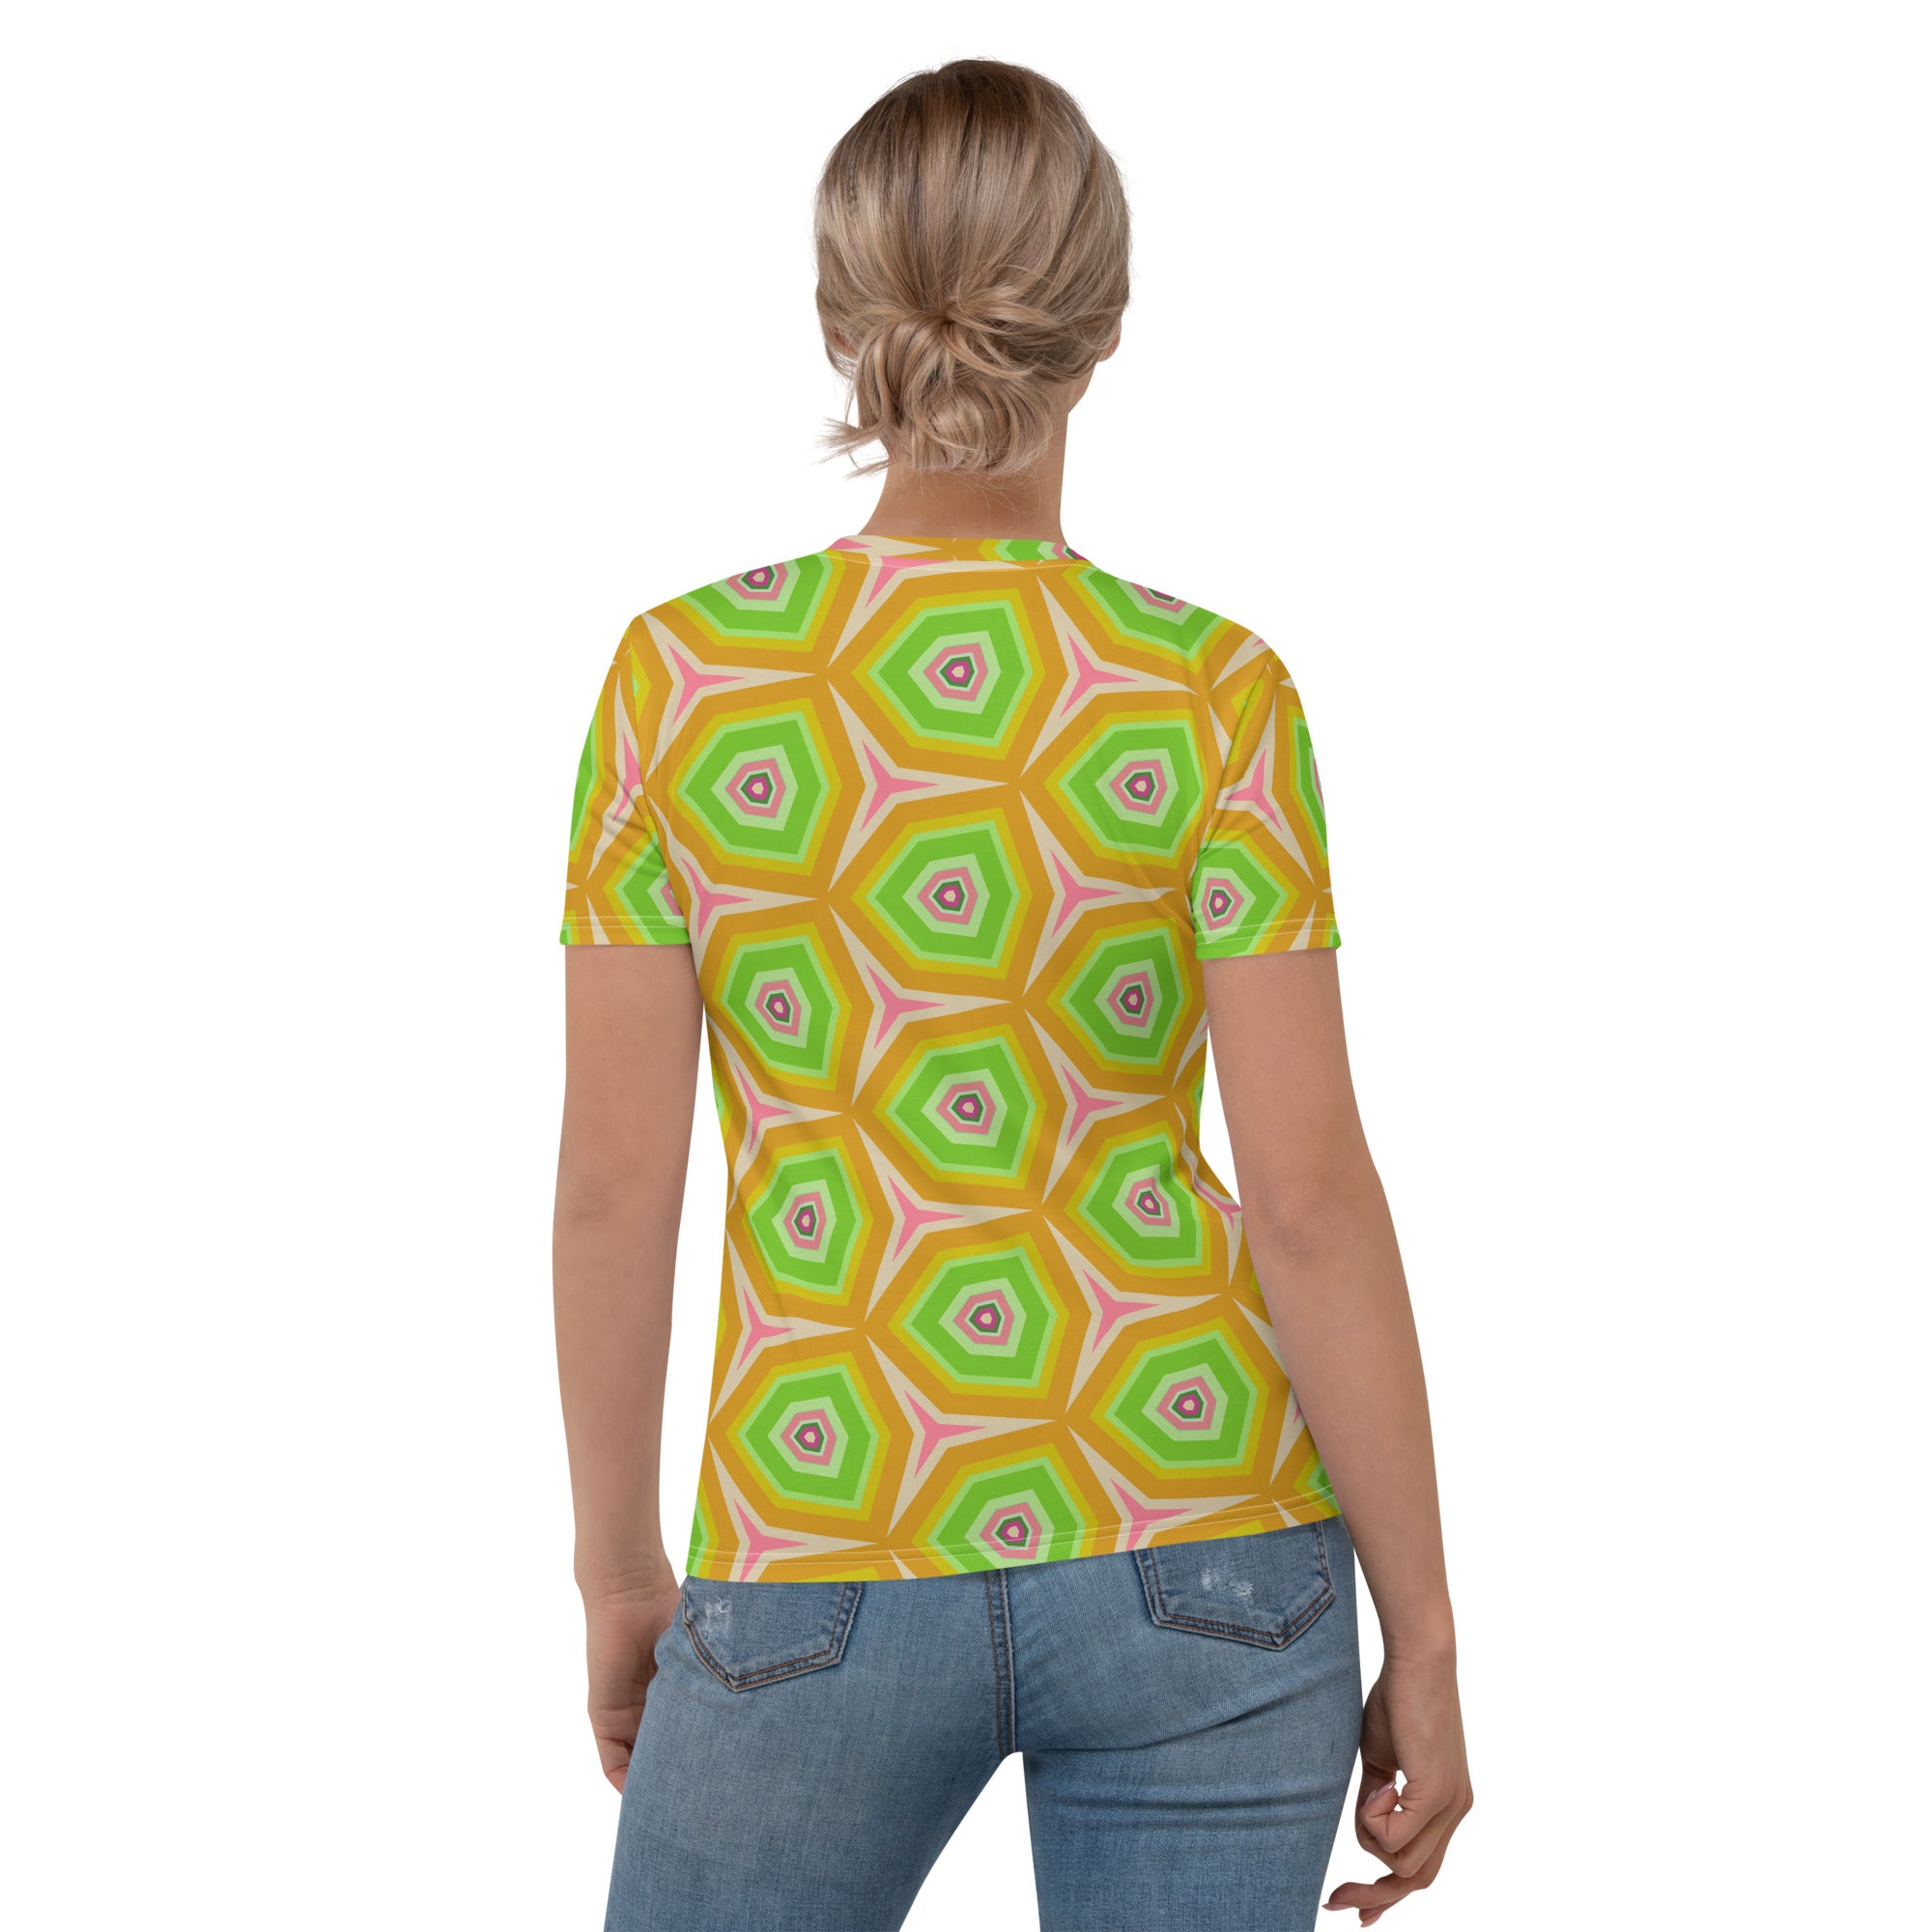 Colorful Modern Mosaic Women's Tee front view